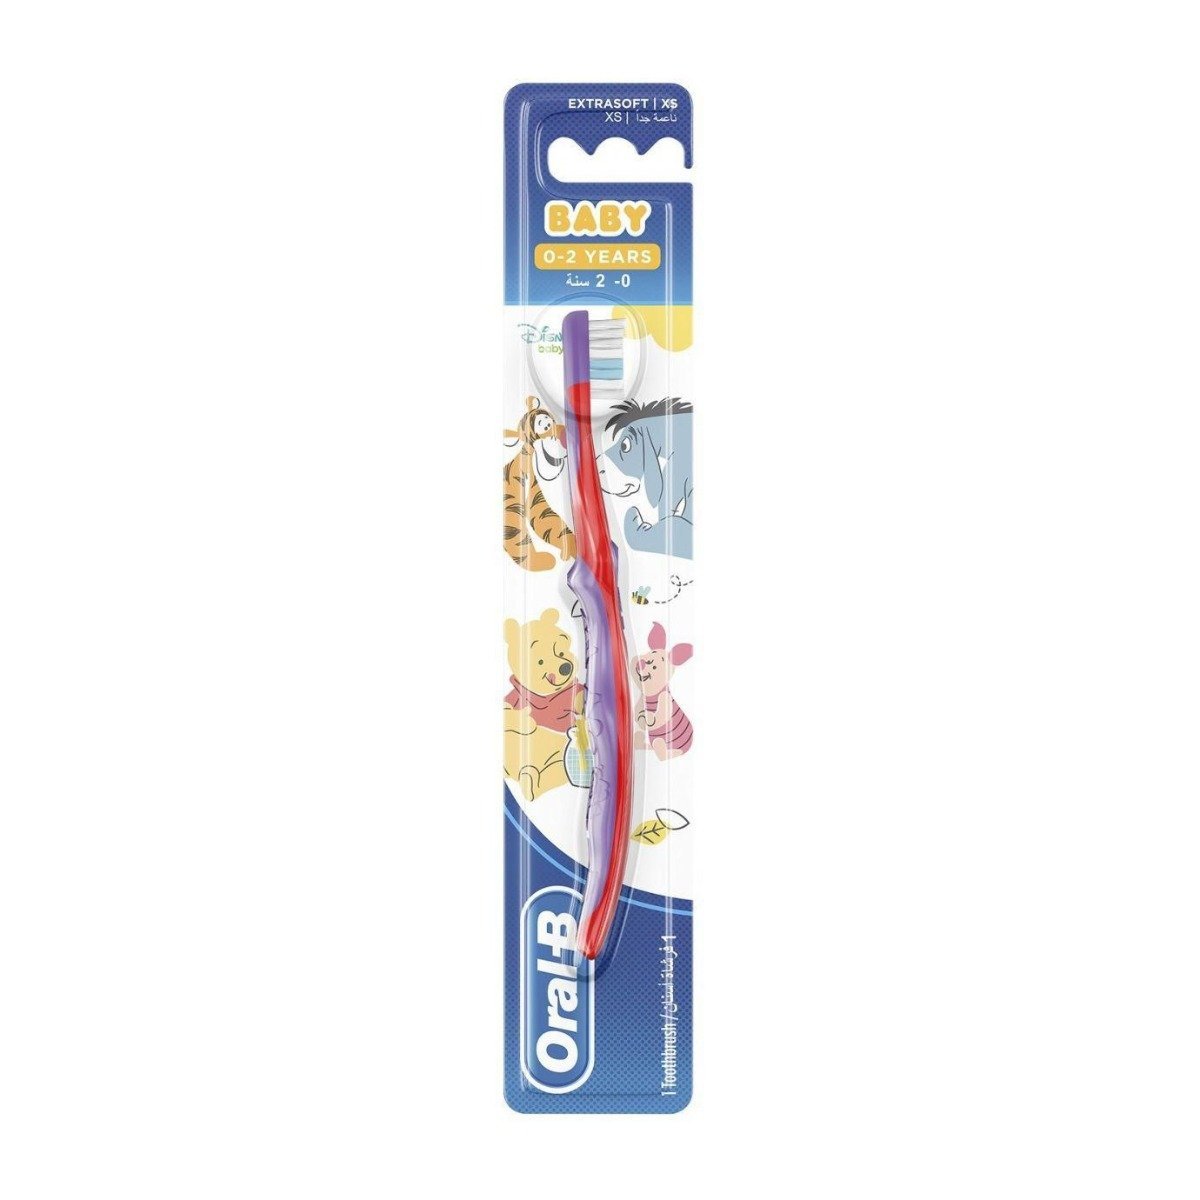 Oral-B Baby 0-2 Years Toothbrush Winnie The Pooh - XS Extra Soft - Bloom Pharmacy